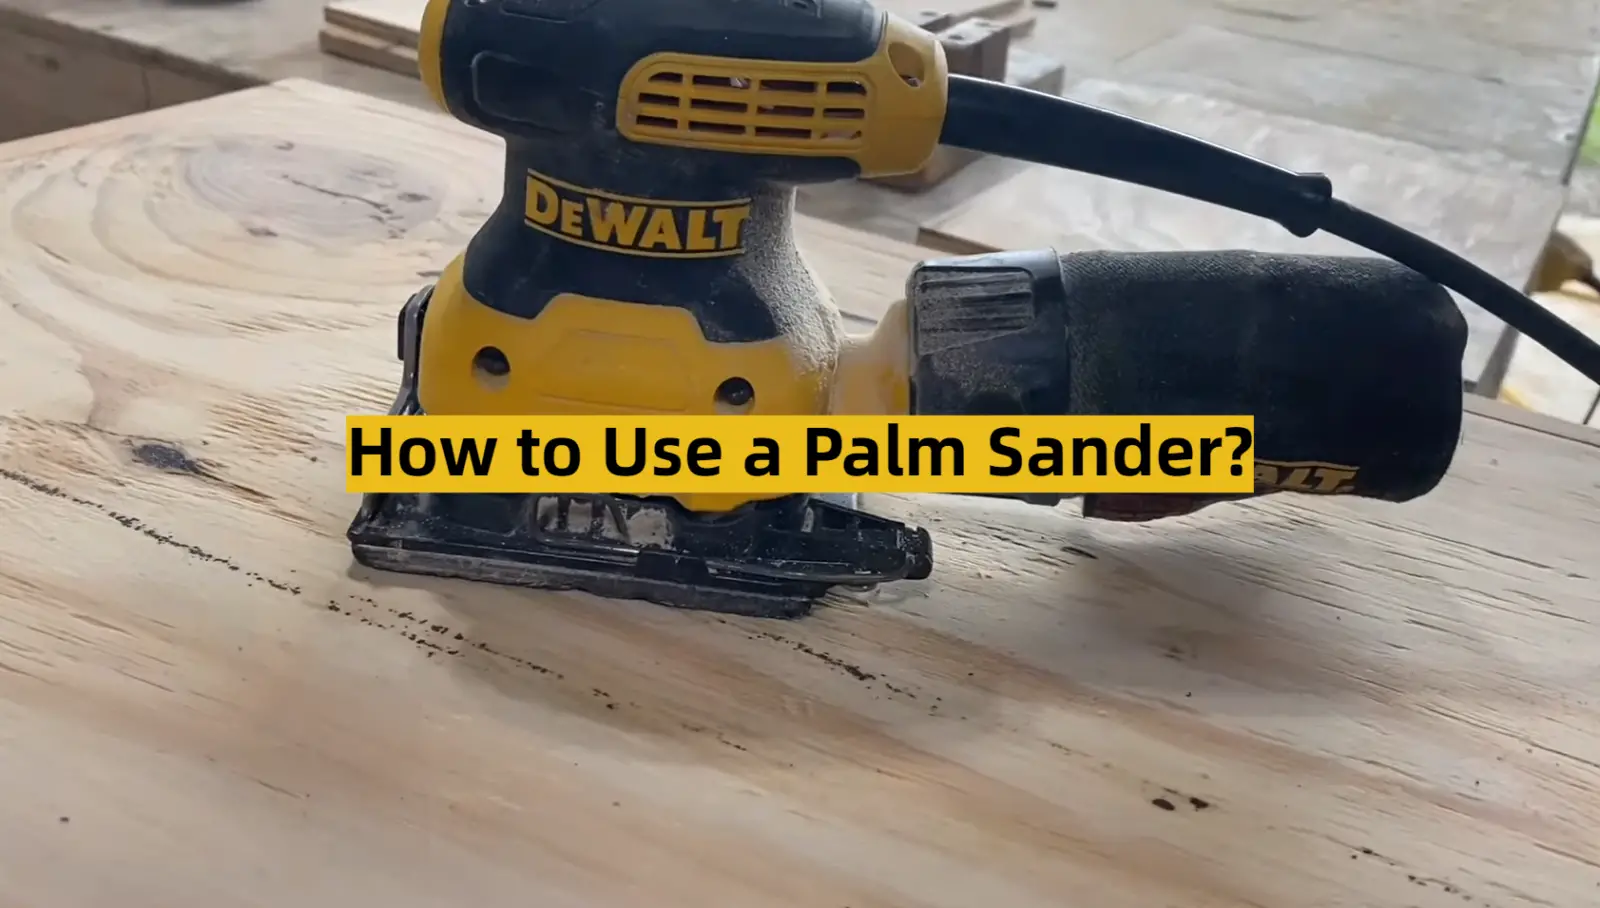 How to Use a Palm Sander?